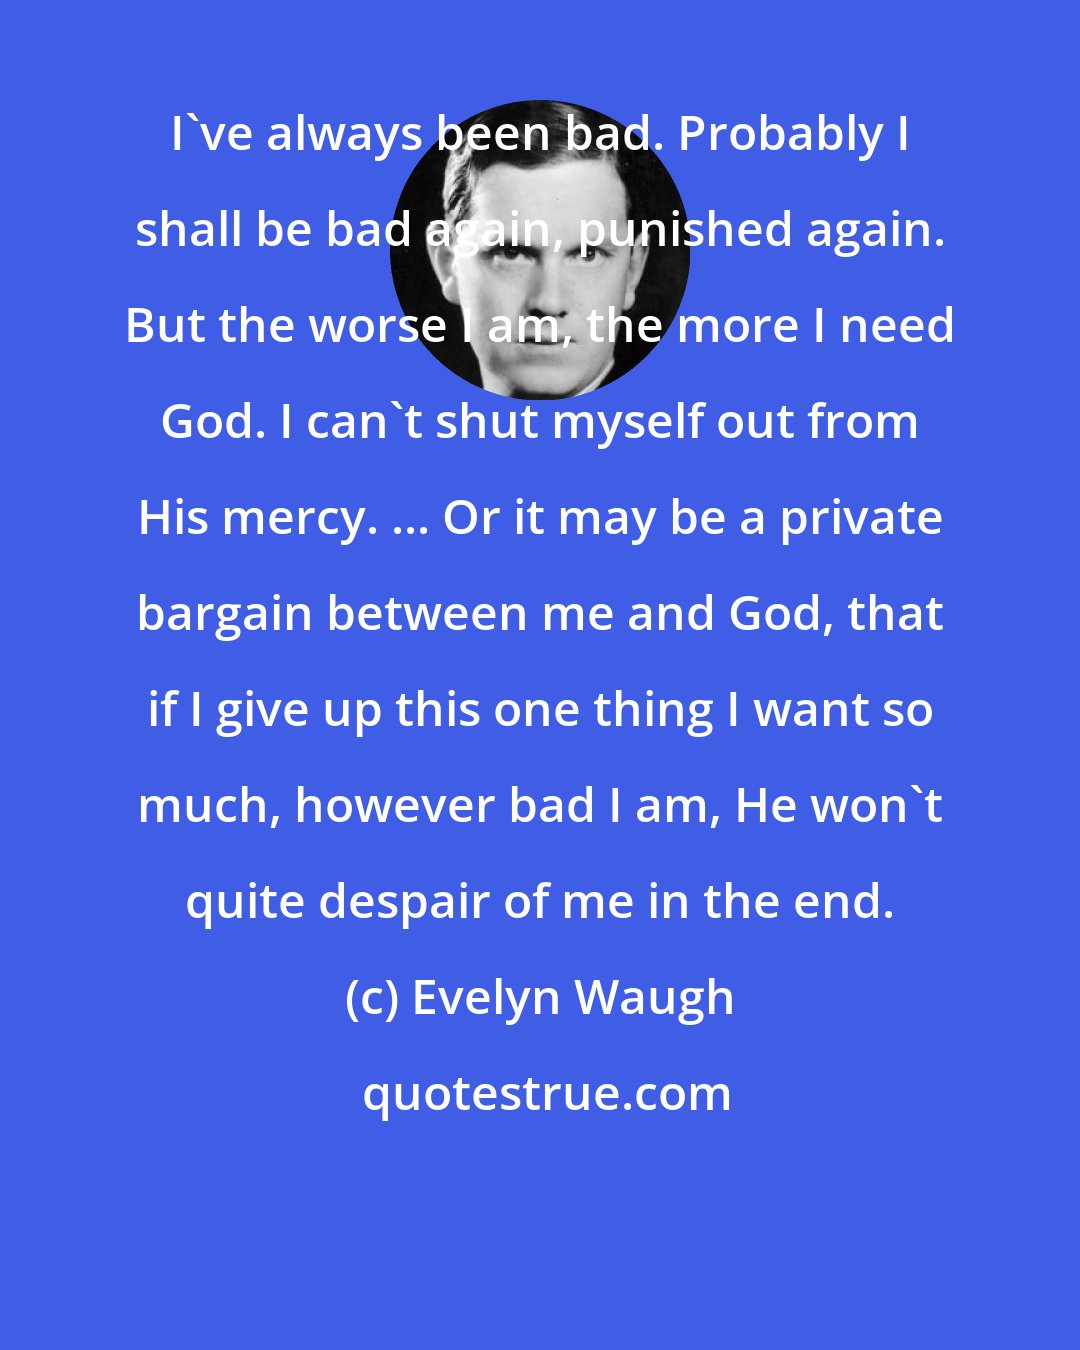 Evelyn Waugh: I've always been bad. Probably I shall be bad again, punished again. But the worse I am, the more I need God. I can't shut myself out from His mercy. ... Or it may be a private bargain between me and God, that if I give up this one thing I want so much, however bad I am, He won't quite despair of me in the end.